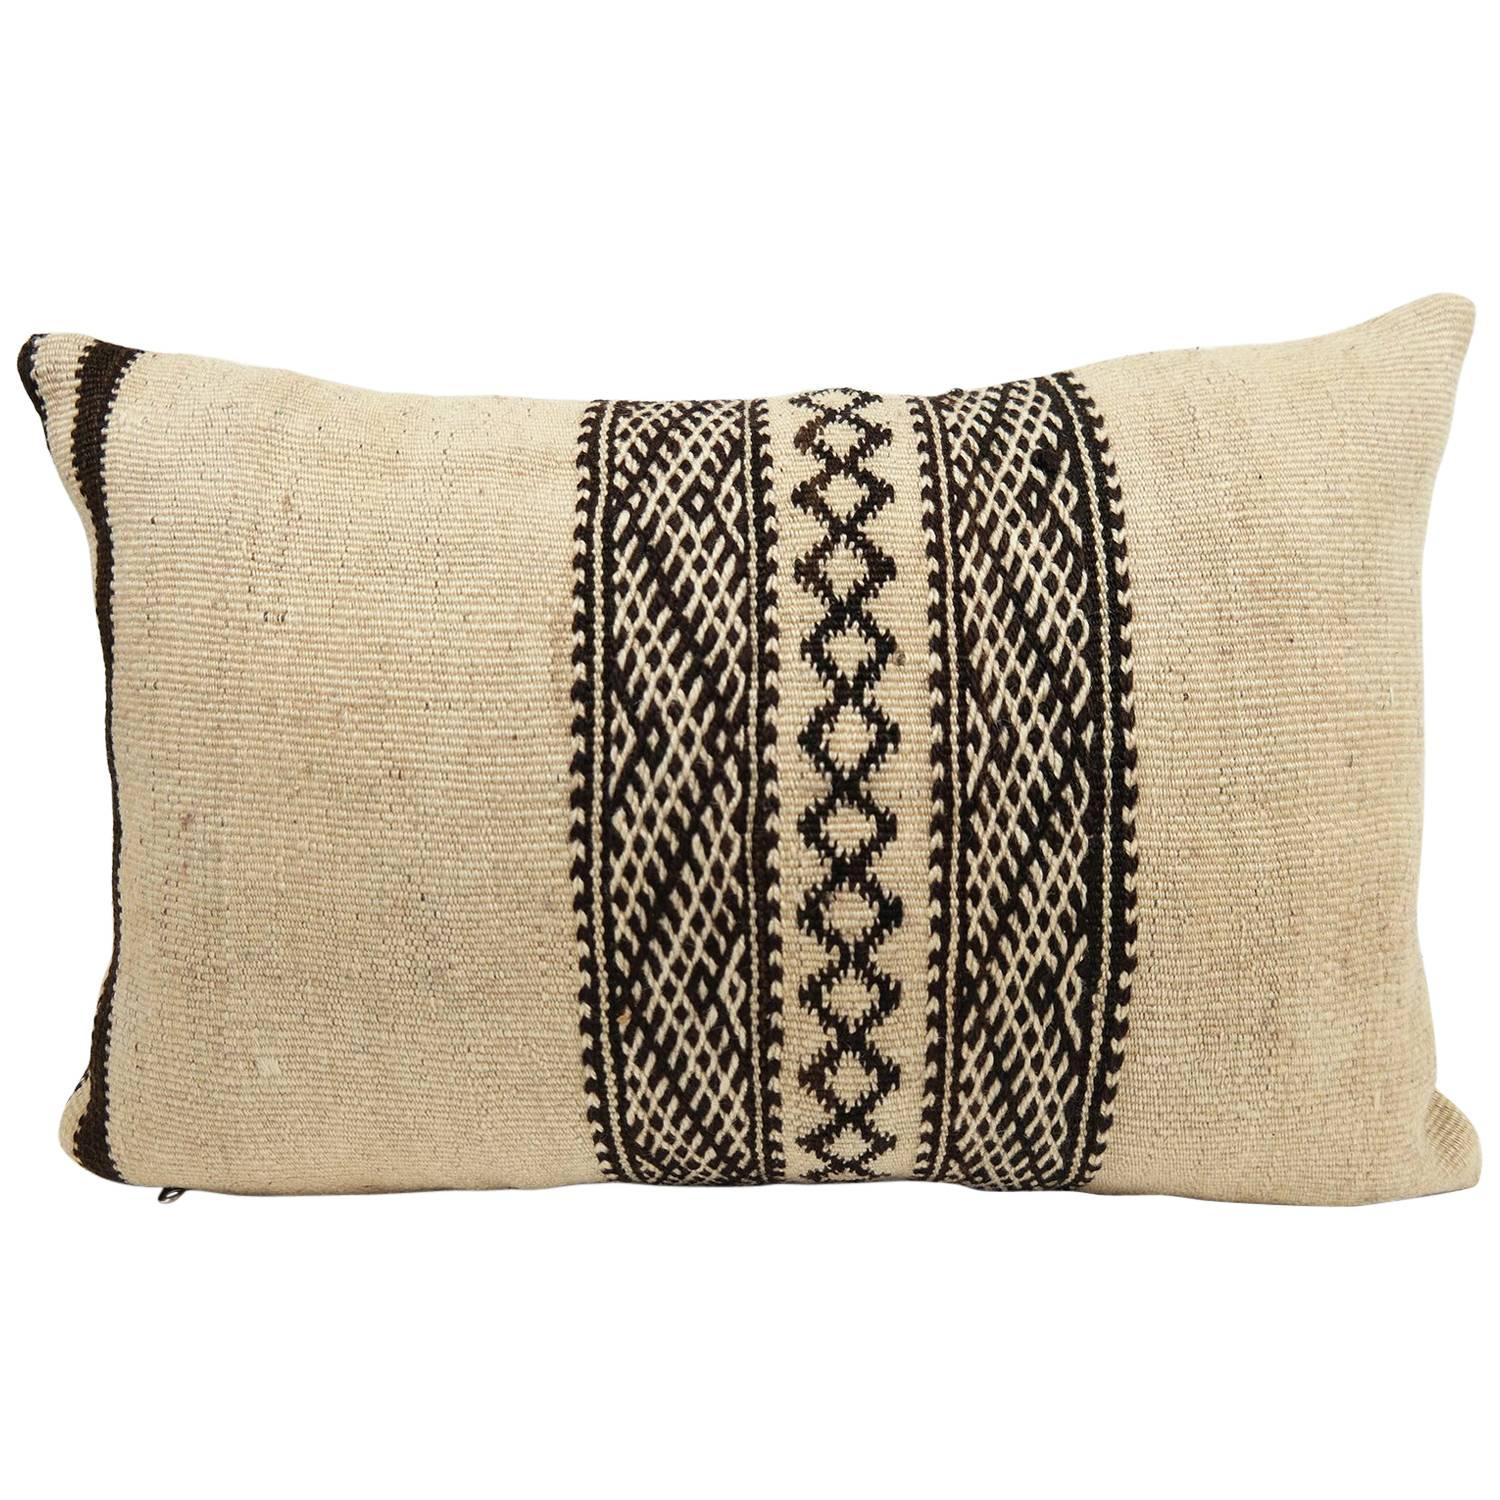 Decorative pillow  Moroccan Pillow  Vintage Kilim Cushion from Morocco